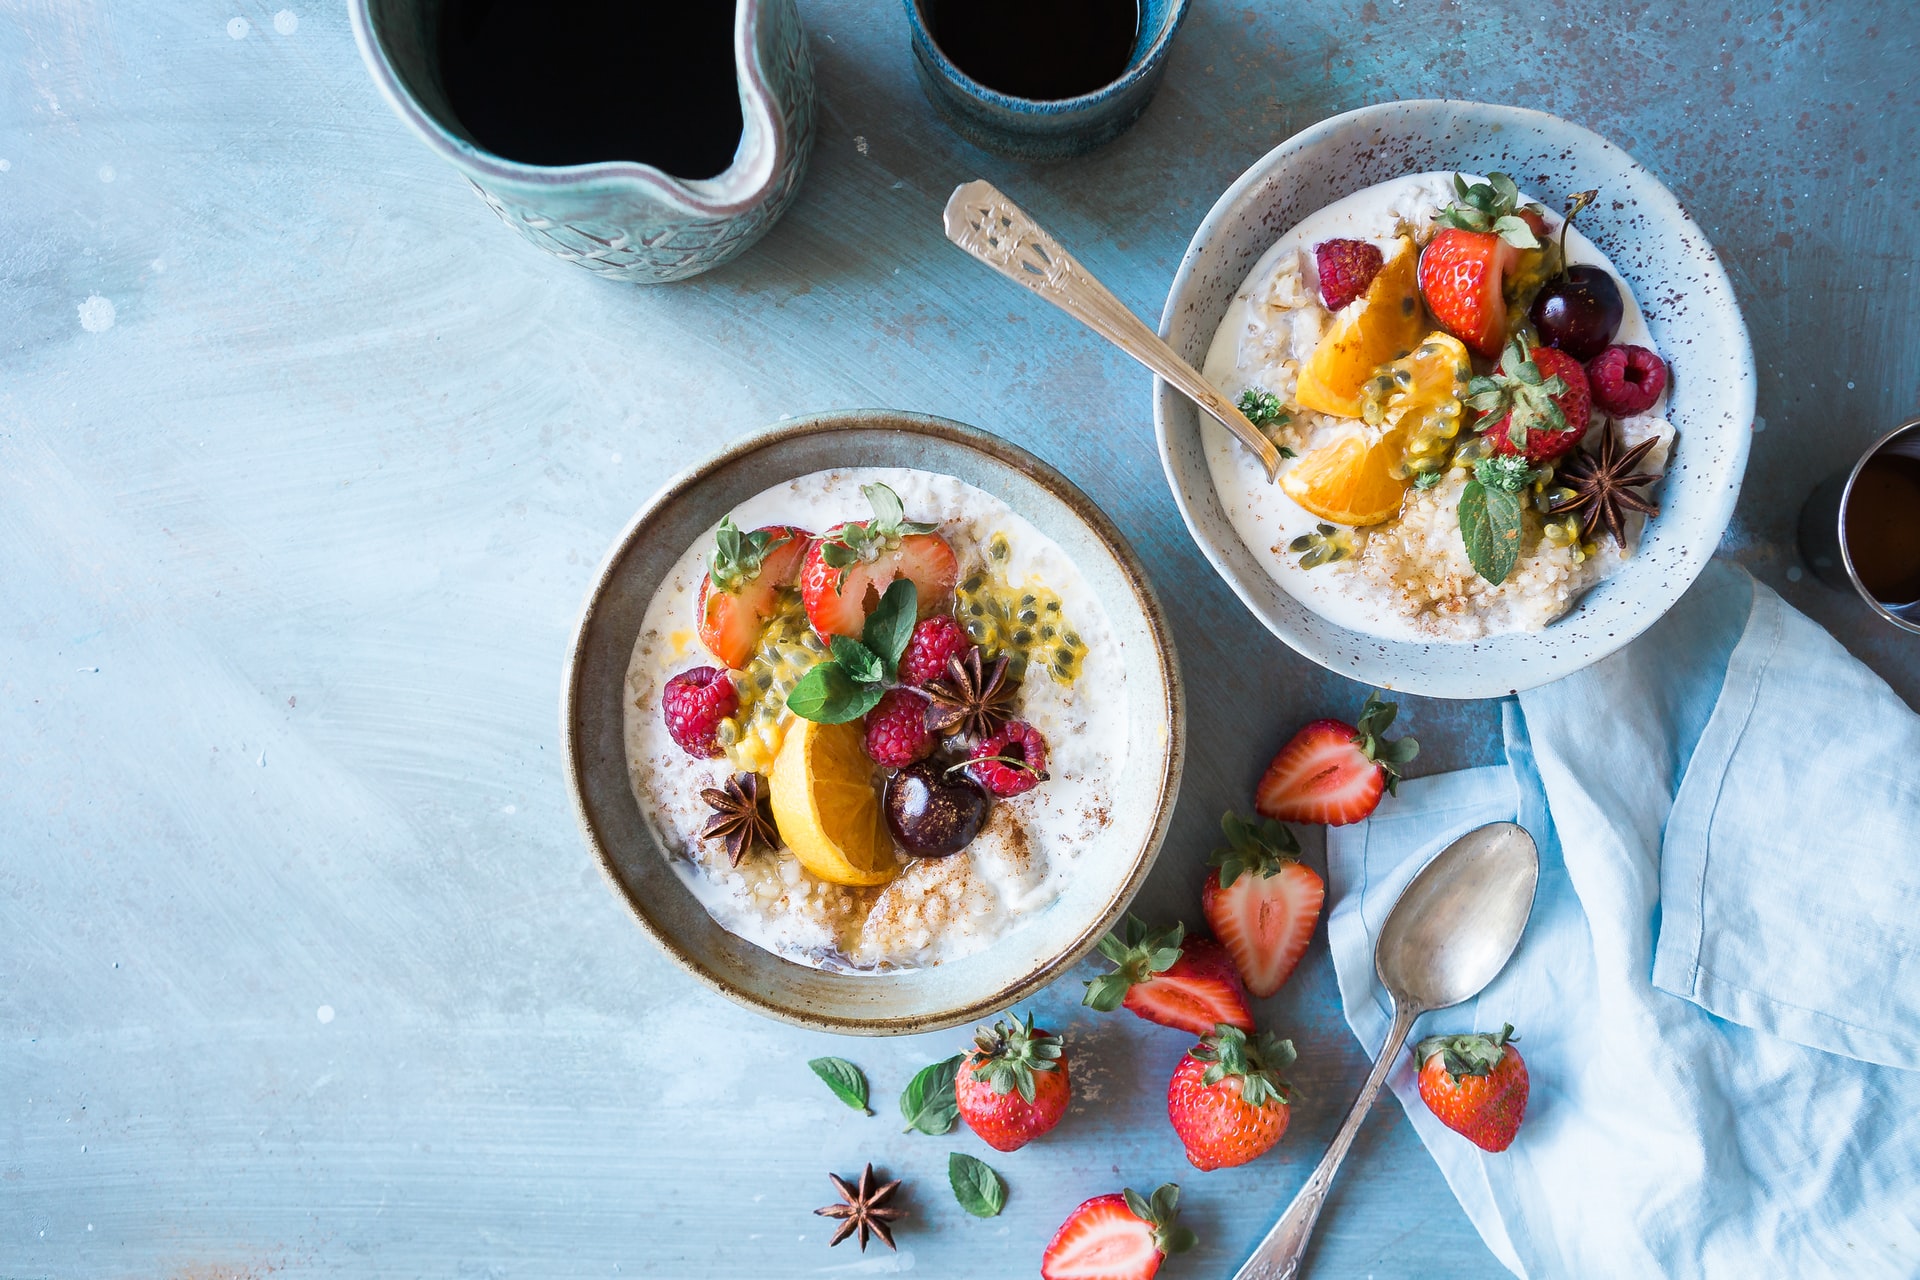 Breakfast that improves brain function – find out how to prepare it!